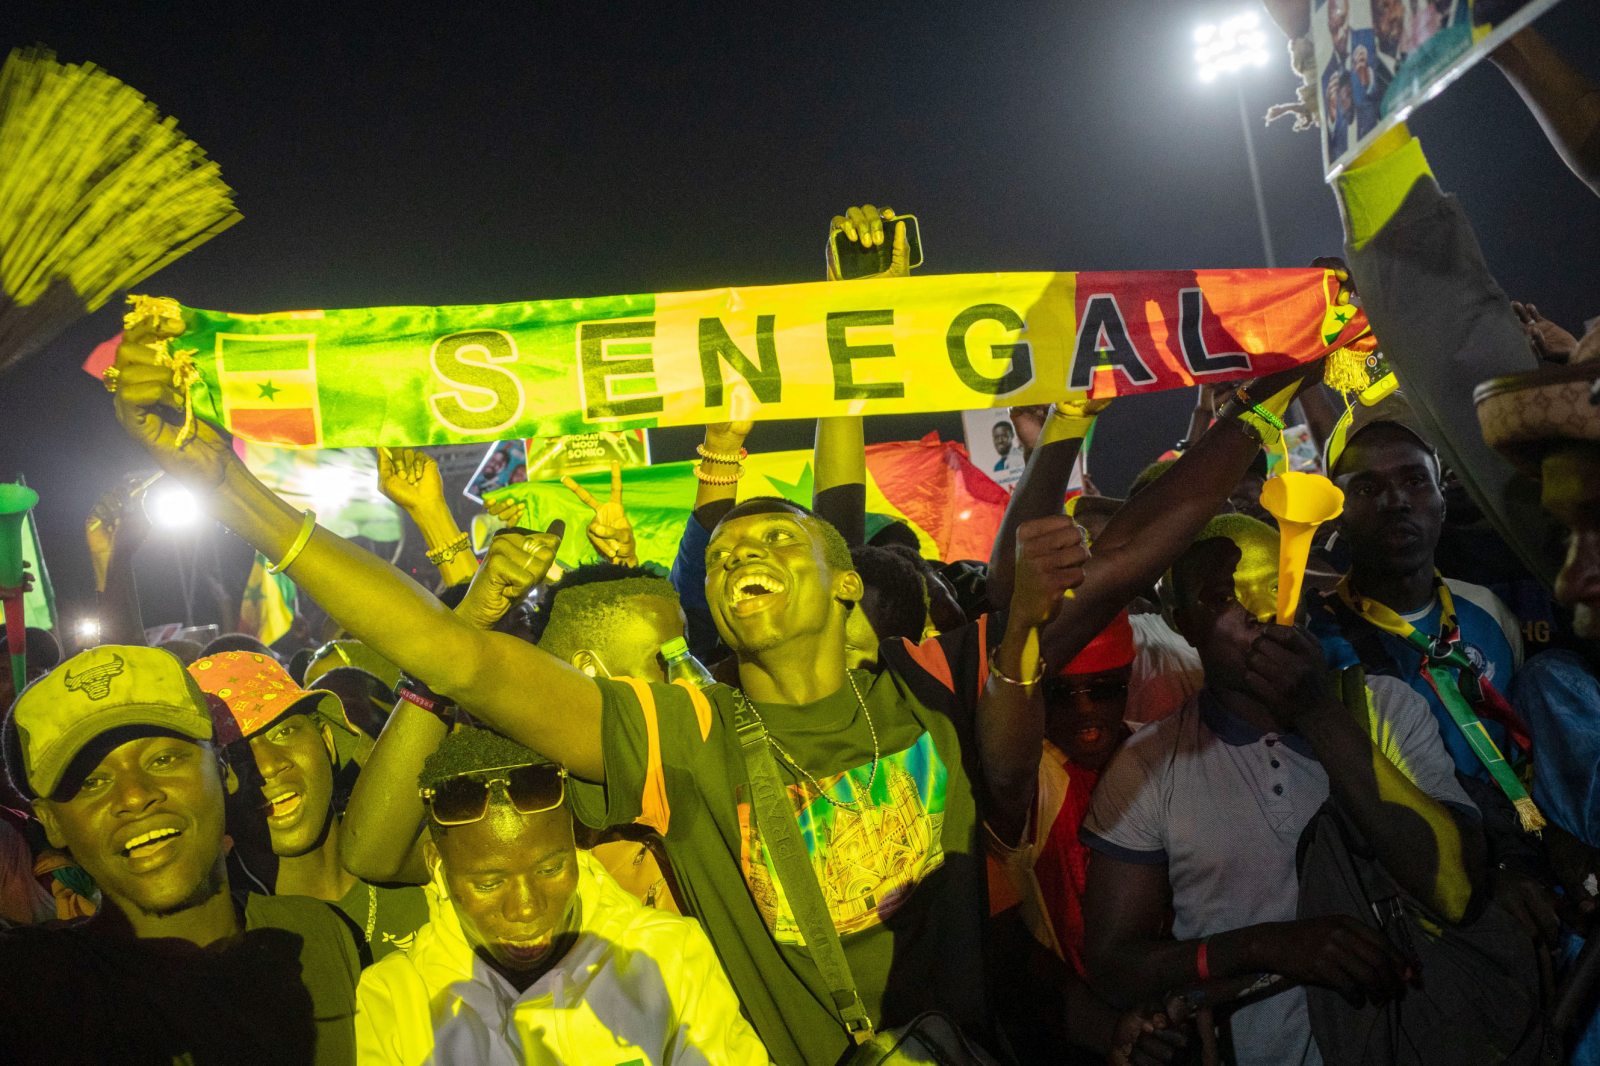 After a Senegalese Constitutional Crisis, Civil Society Leads the Way